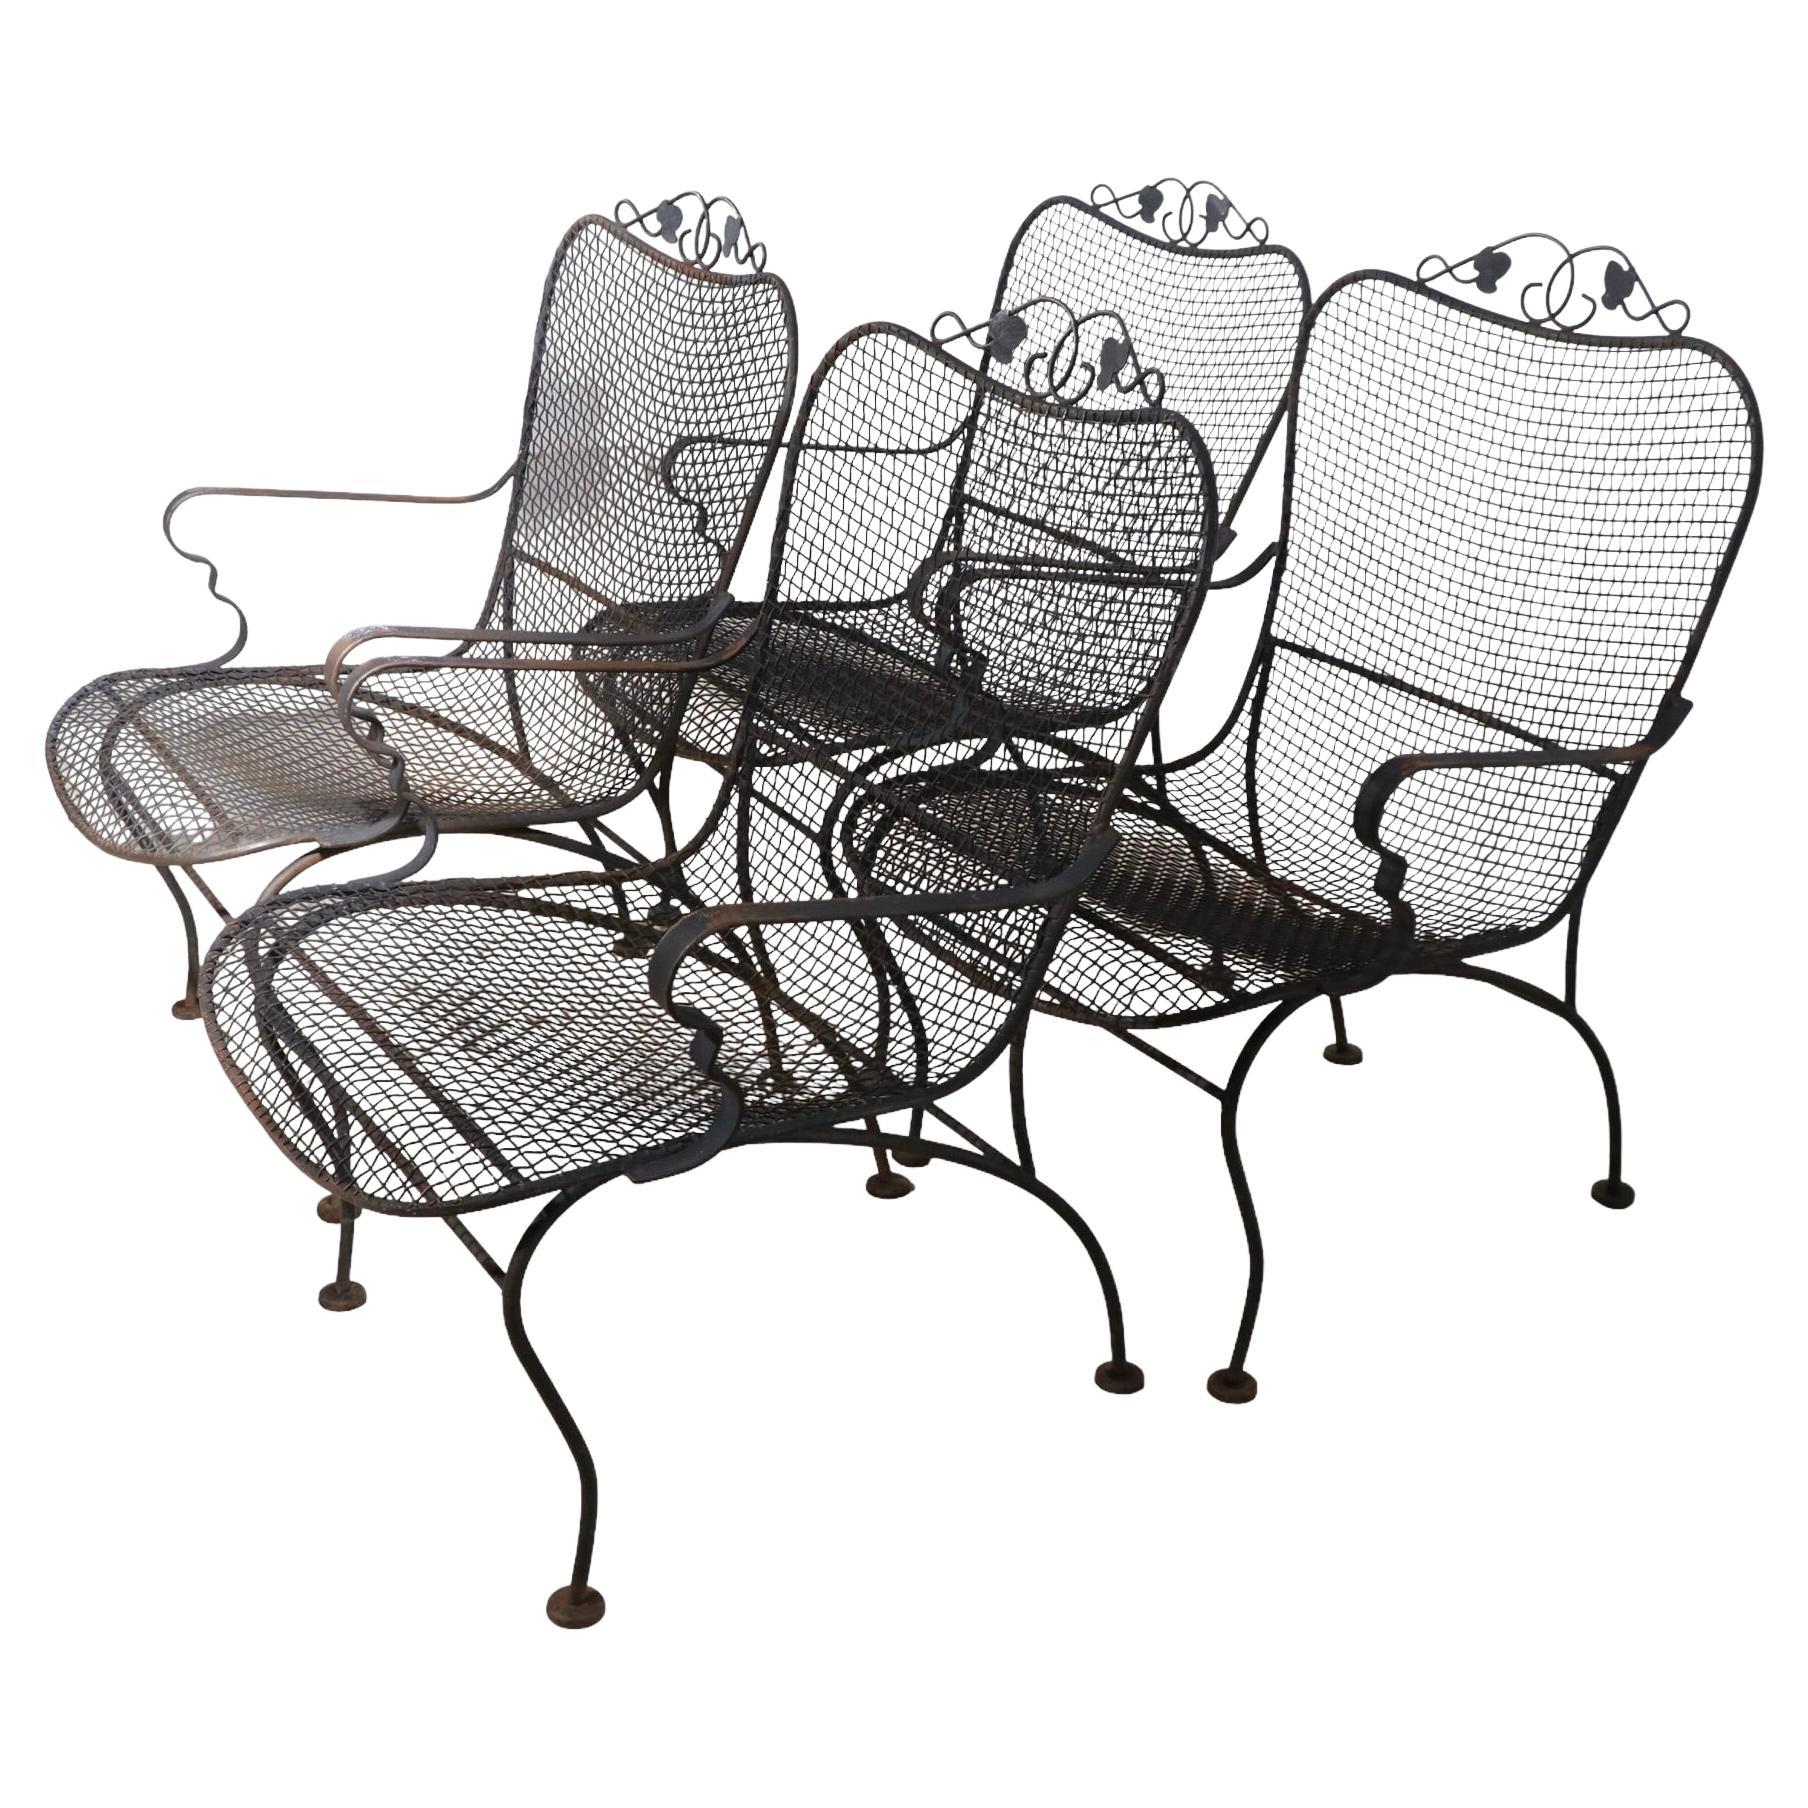 Set of Four Garden, Patio, Poolside Chairs by Woodard